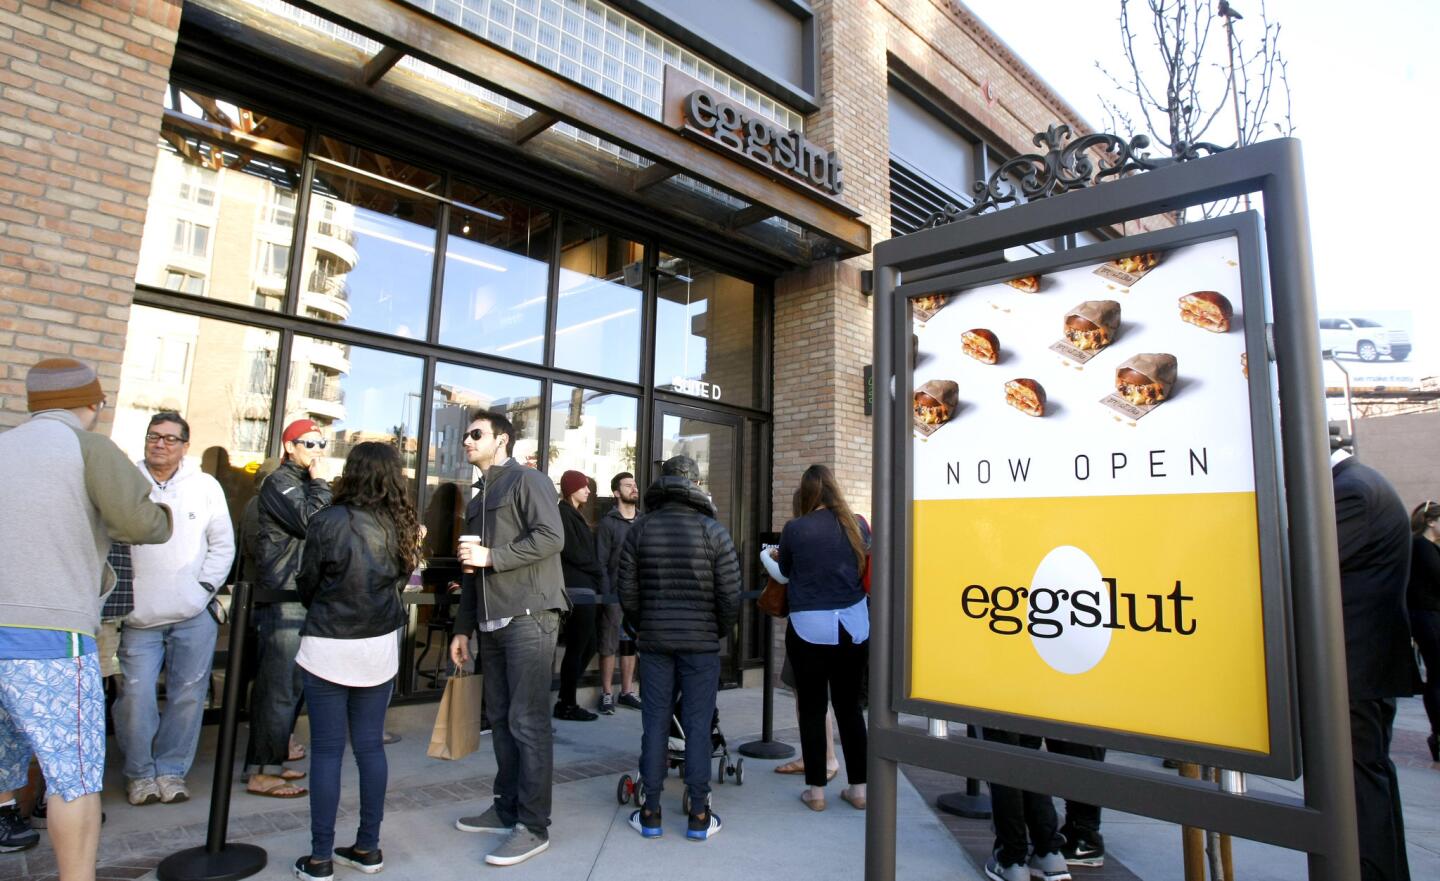 Customers line up to be among the first to eat at the new Eggslut eatery on Brand Blvd. in Glendale, on Thursday, March 23, 2017.